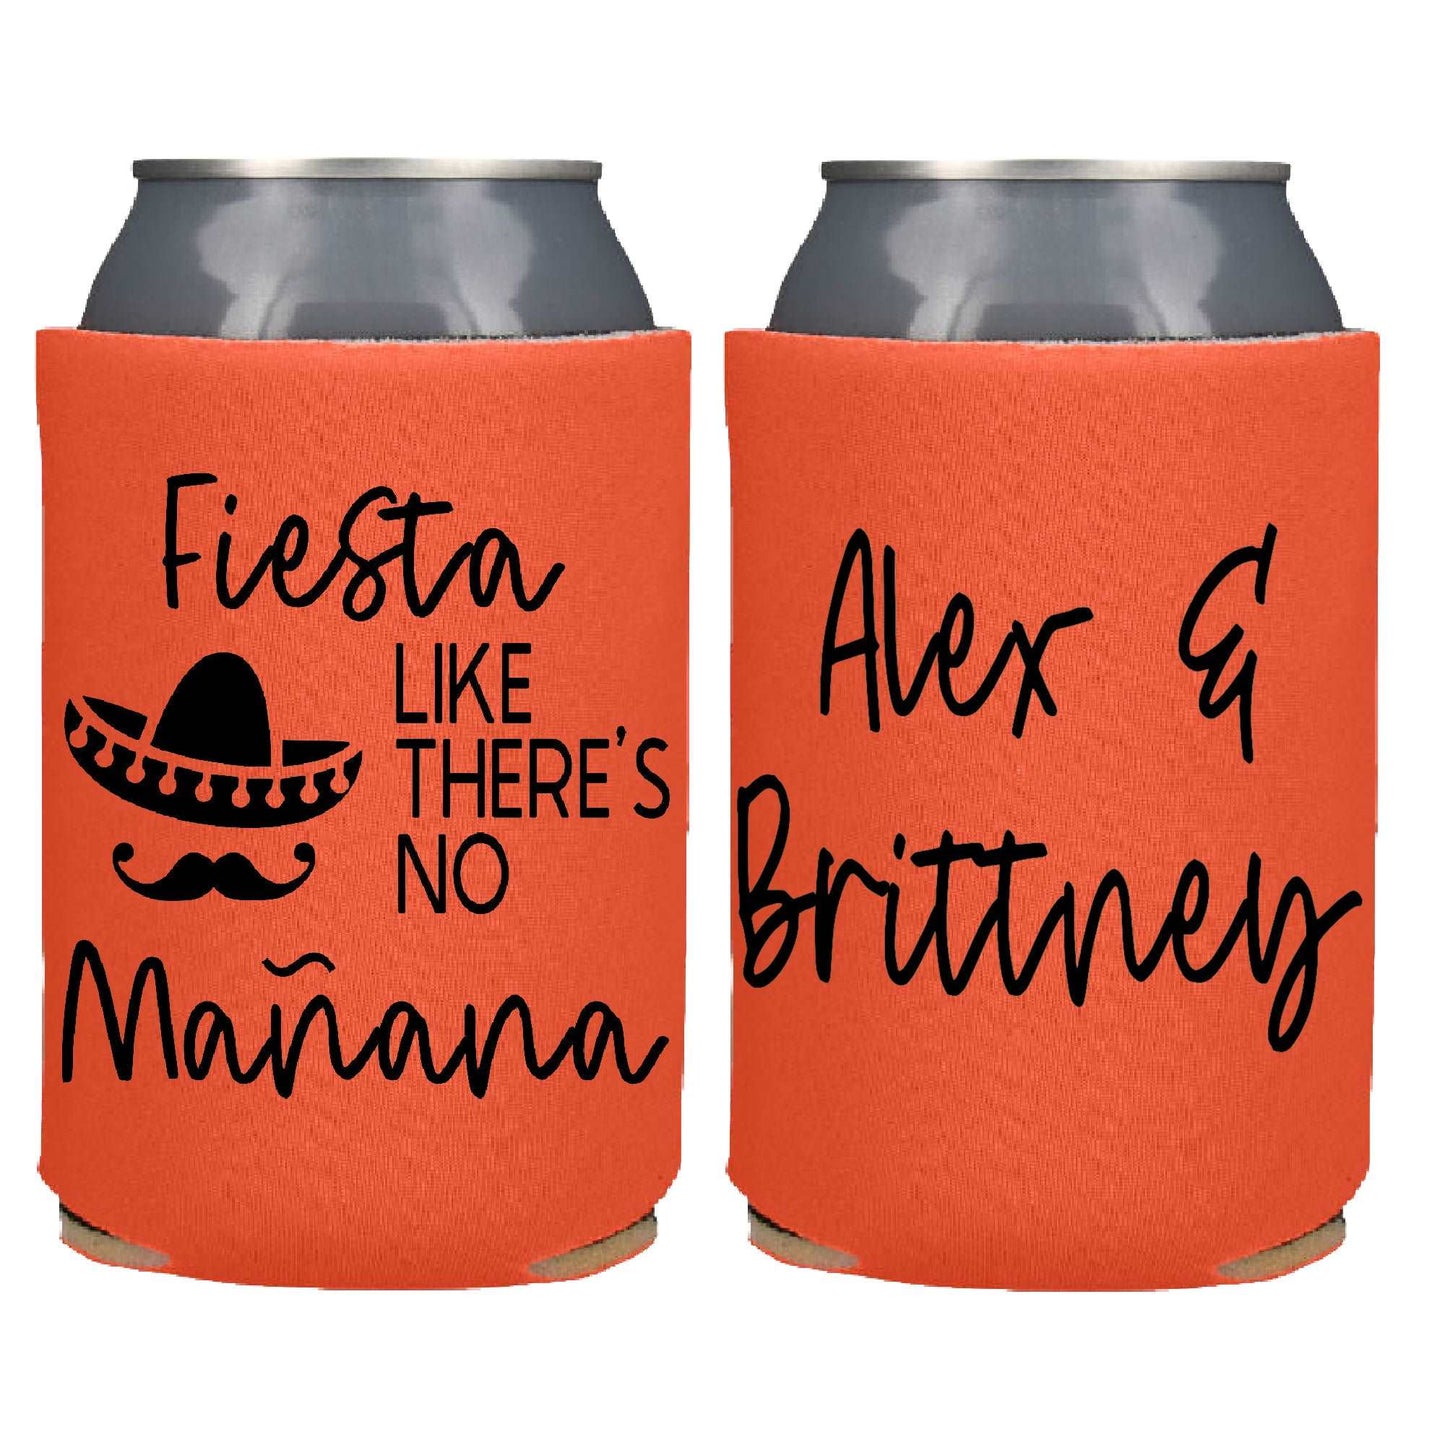 Fiesta Like There's No Manana Screen Printed Can Cooler